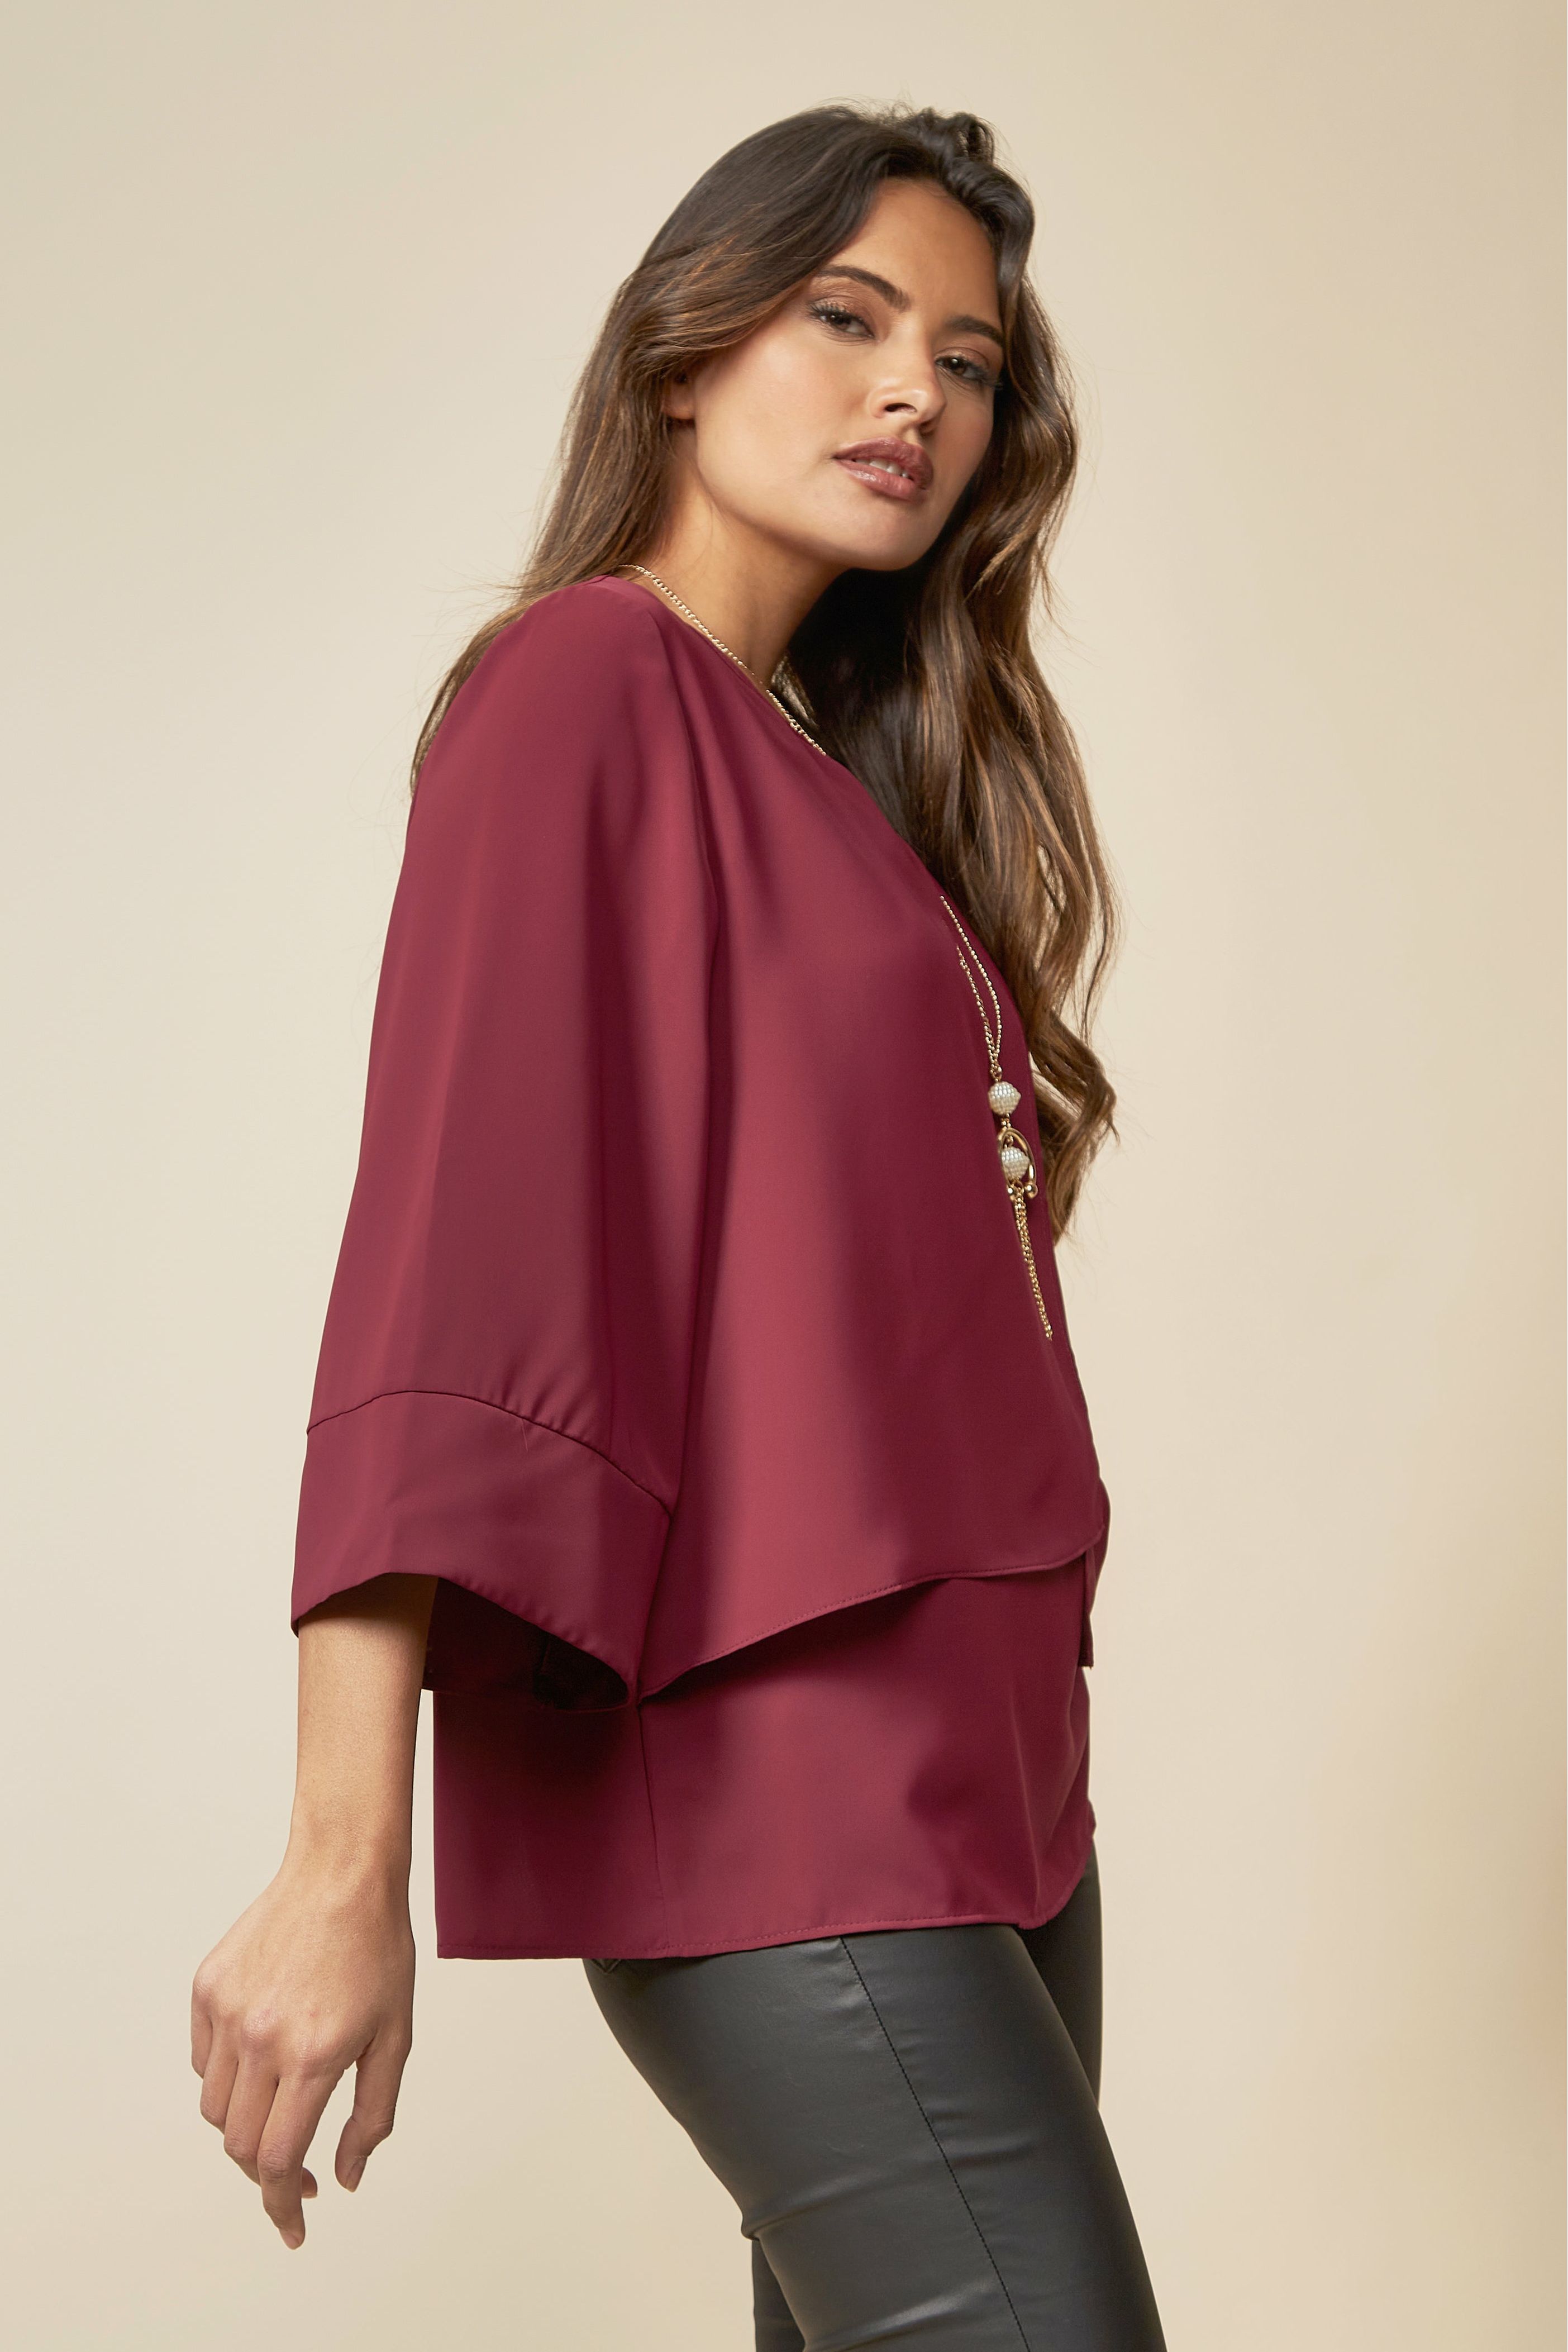 Layered Top With 3/4 Sleeves in Burgundy with Necklace GLR FASHION NETWORKING